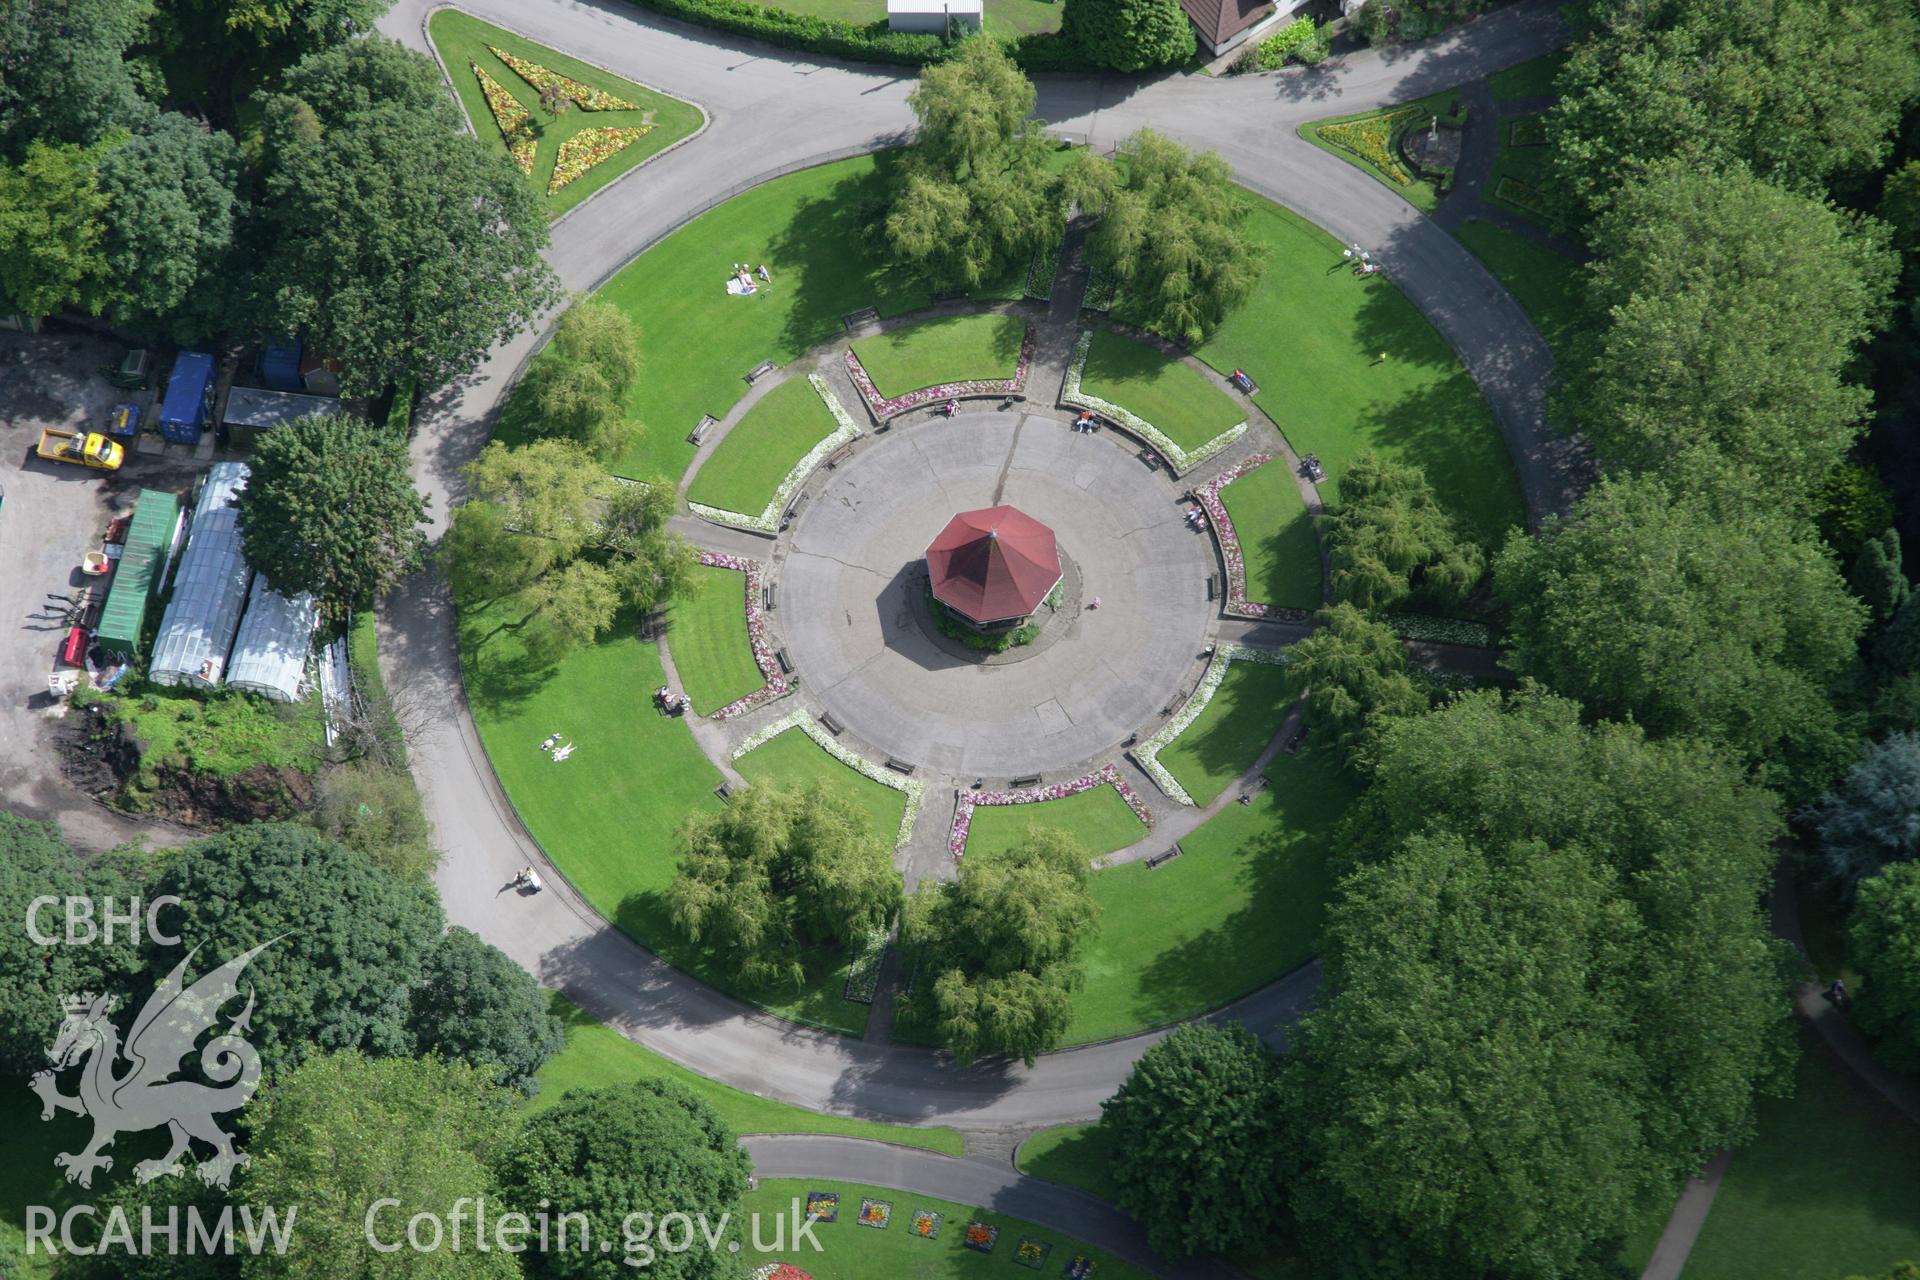 RCAHMW colour oblique aerial photograph of Ynysangharad Park, Pontypridd. Taken on 30 July 2007 by Toby Driver